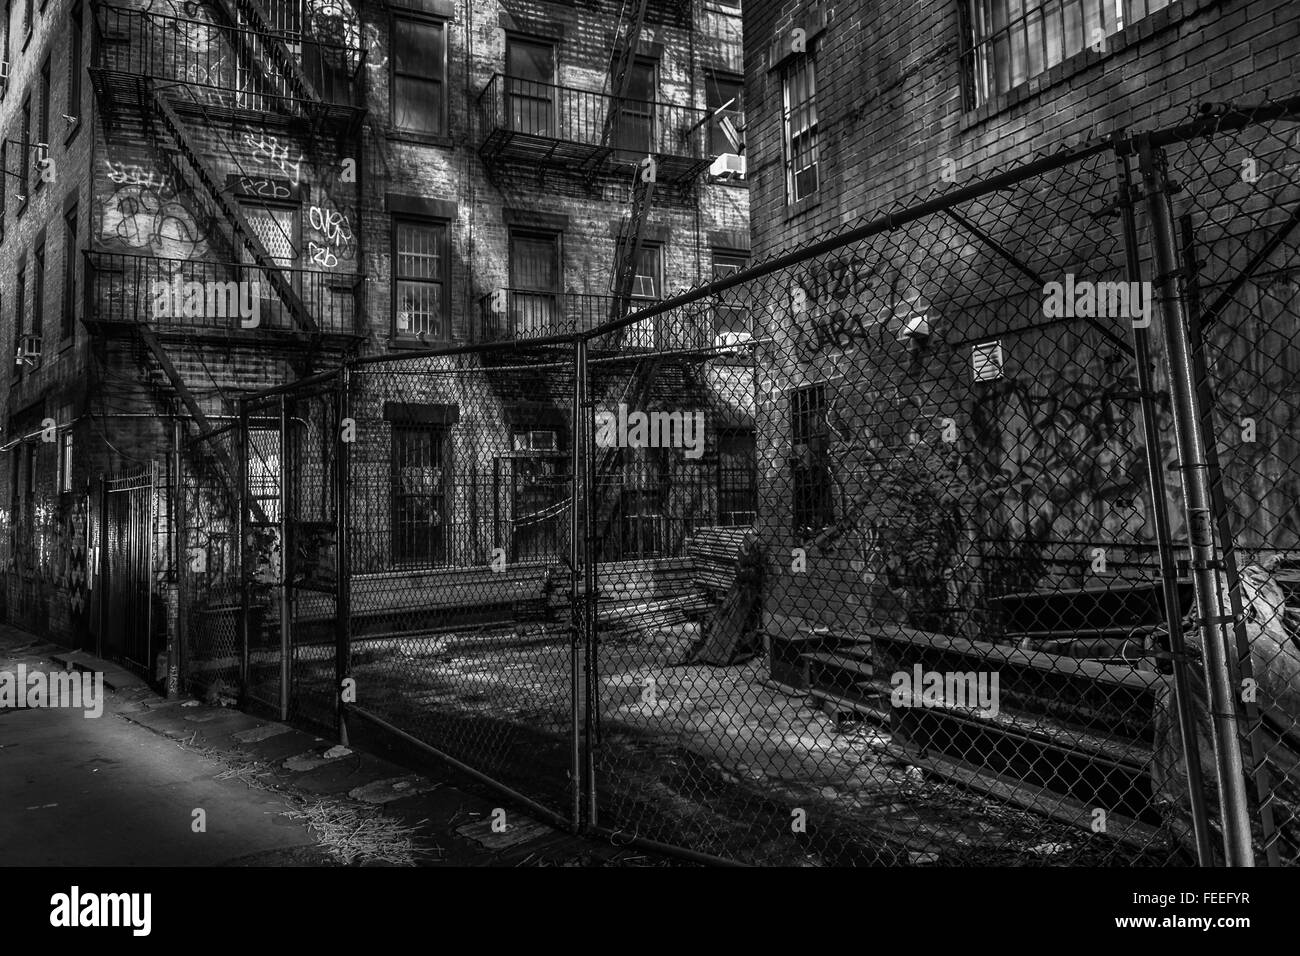 The bronx Black and White Stock Photos & Images - Alamy